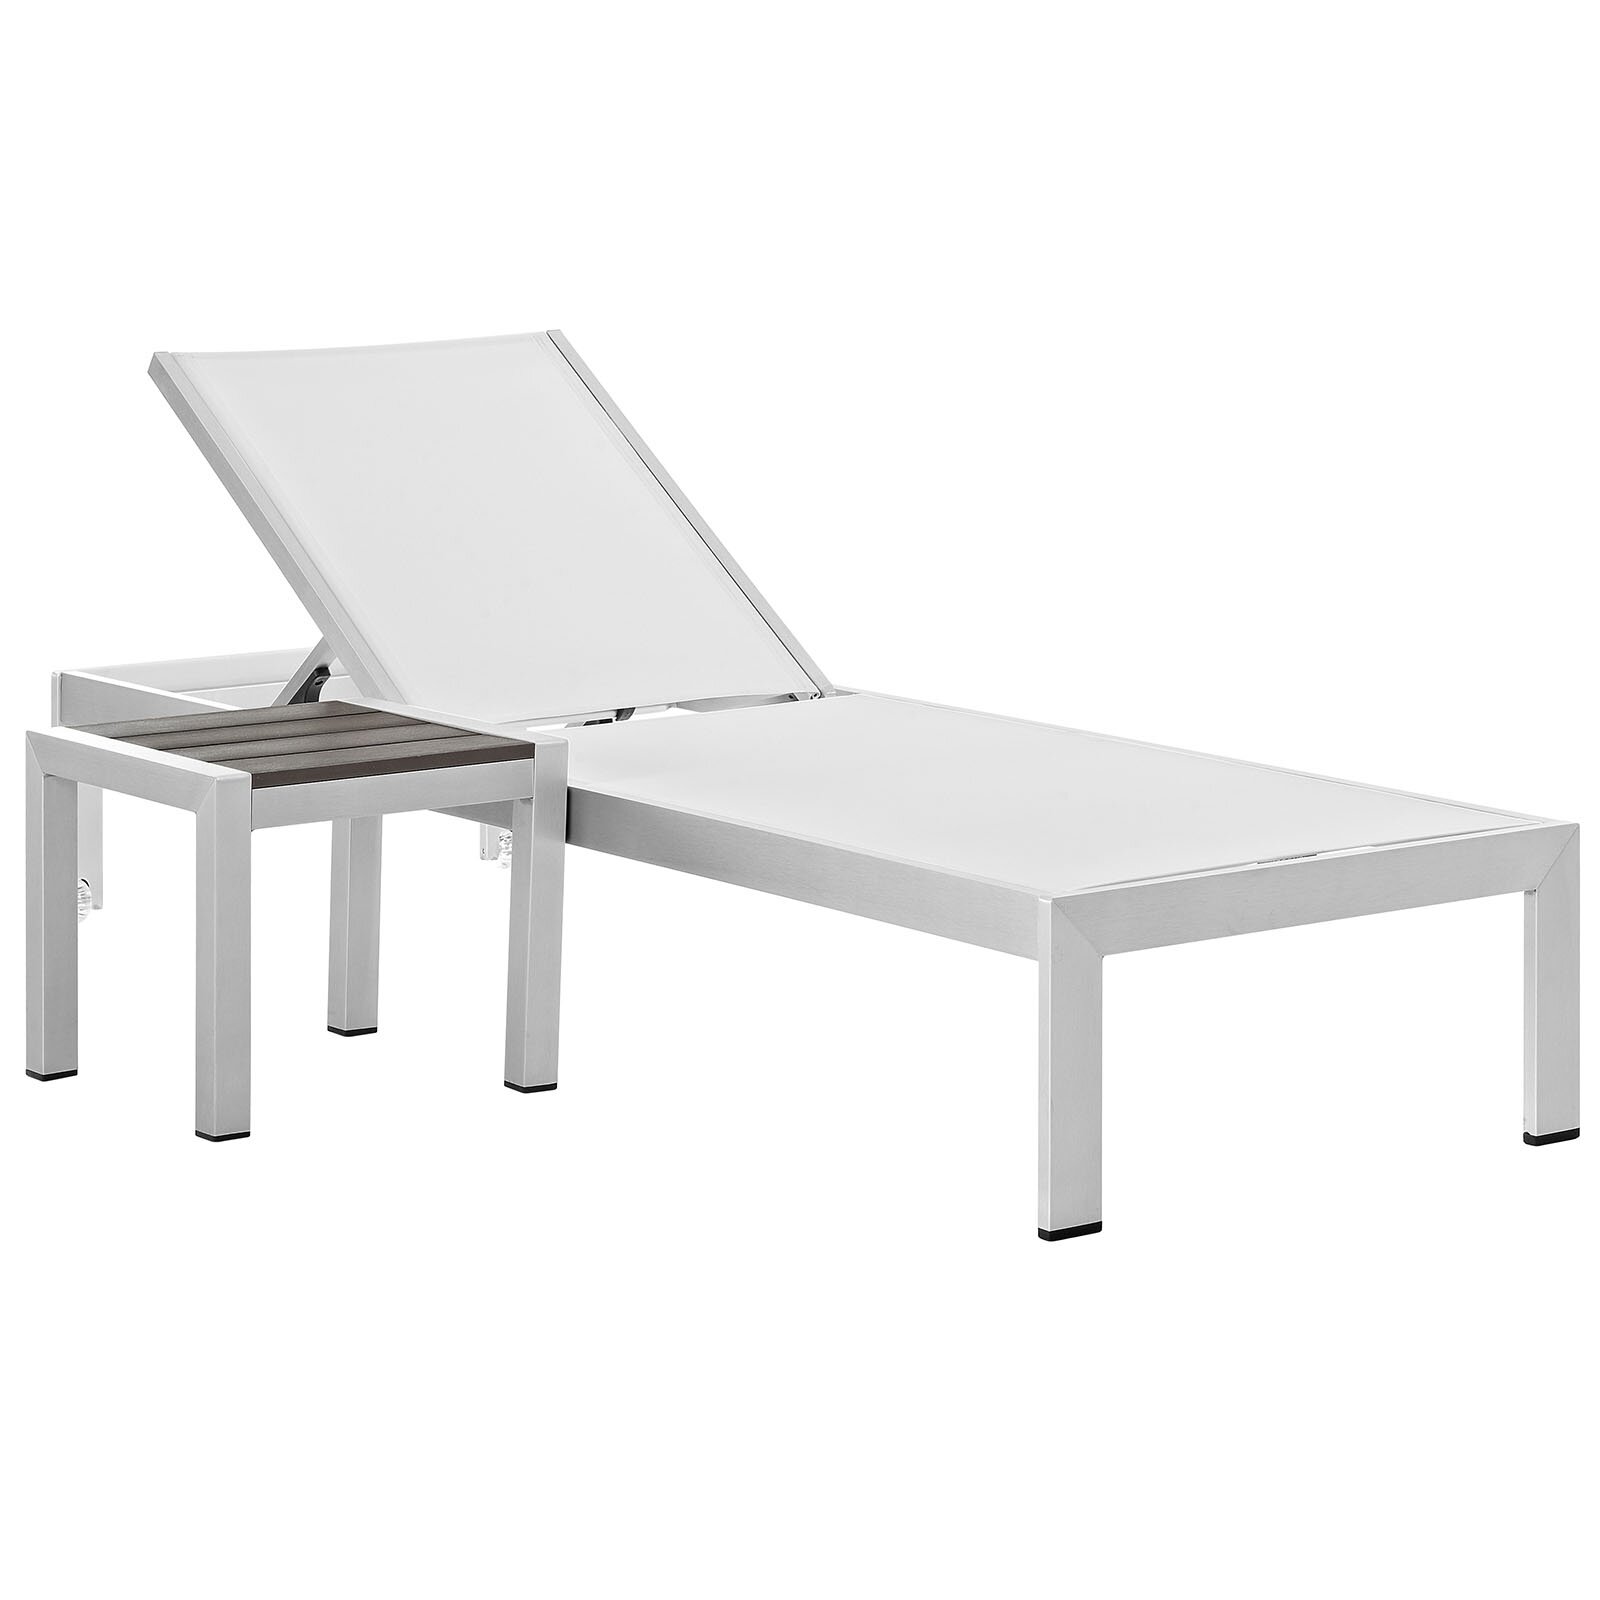 Coline Outdoor Patio Reclining Chaise Lounge with Table, Recliner/height adjustable, Reclining - image 5 of 7